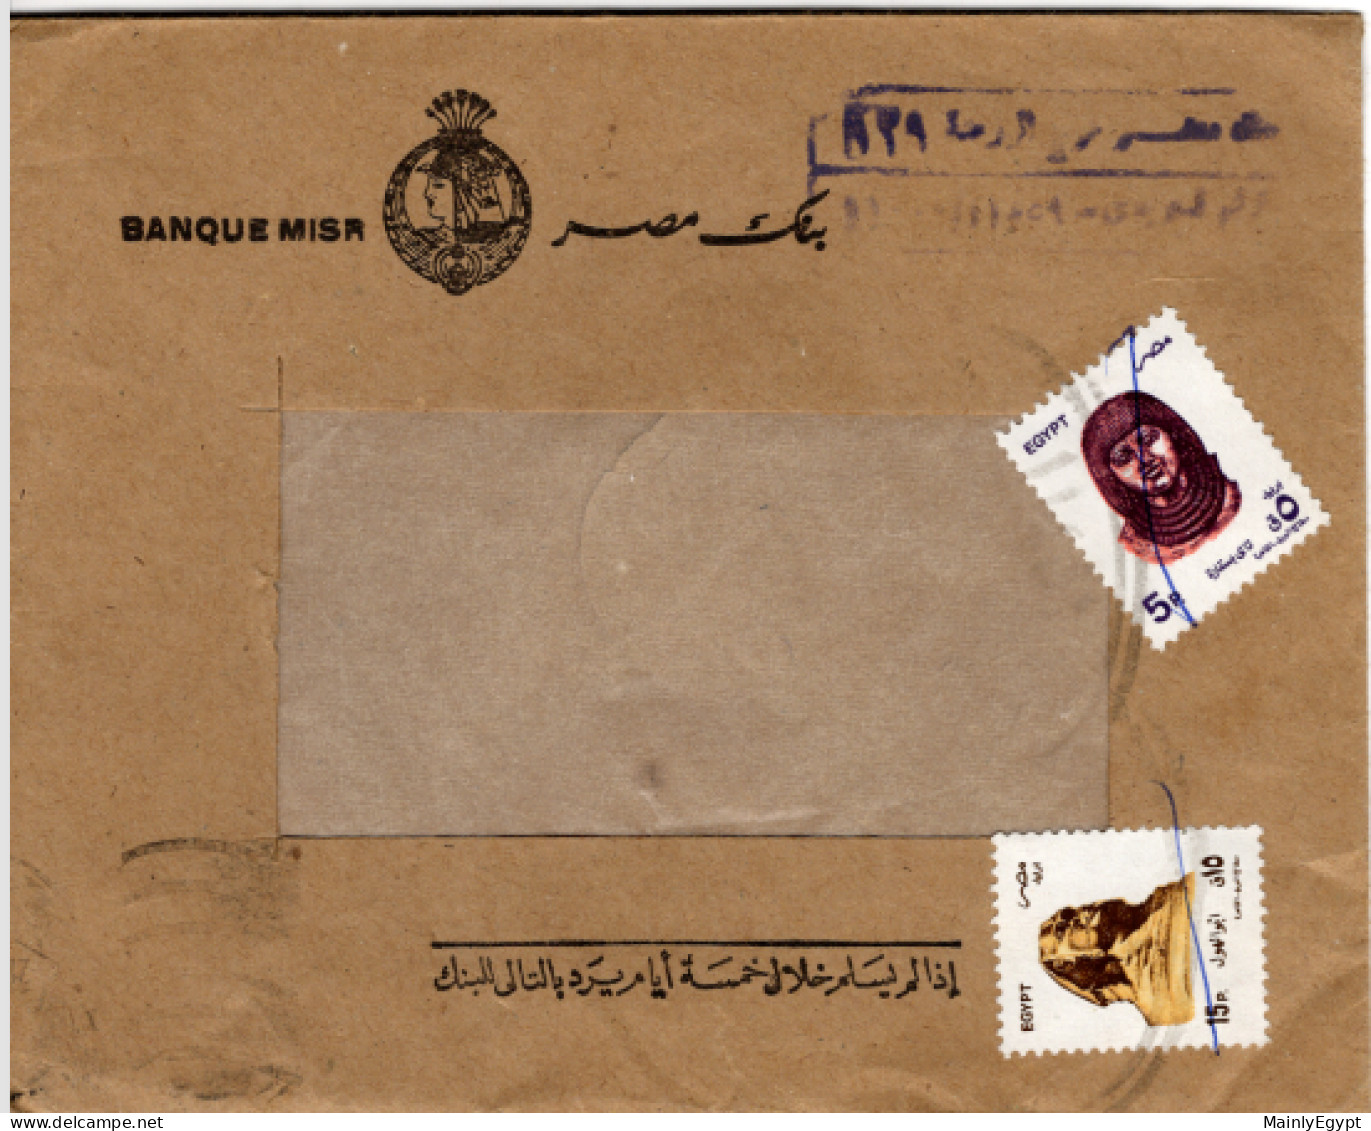 EGYPT: 1994 (?) Cover - Bank Mail, Banque Misr, Mi.1817,1818 Statue And Sphinx (B172) - Cartas & Documentos